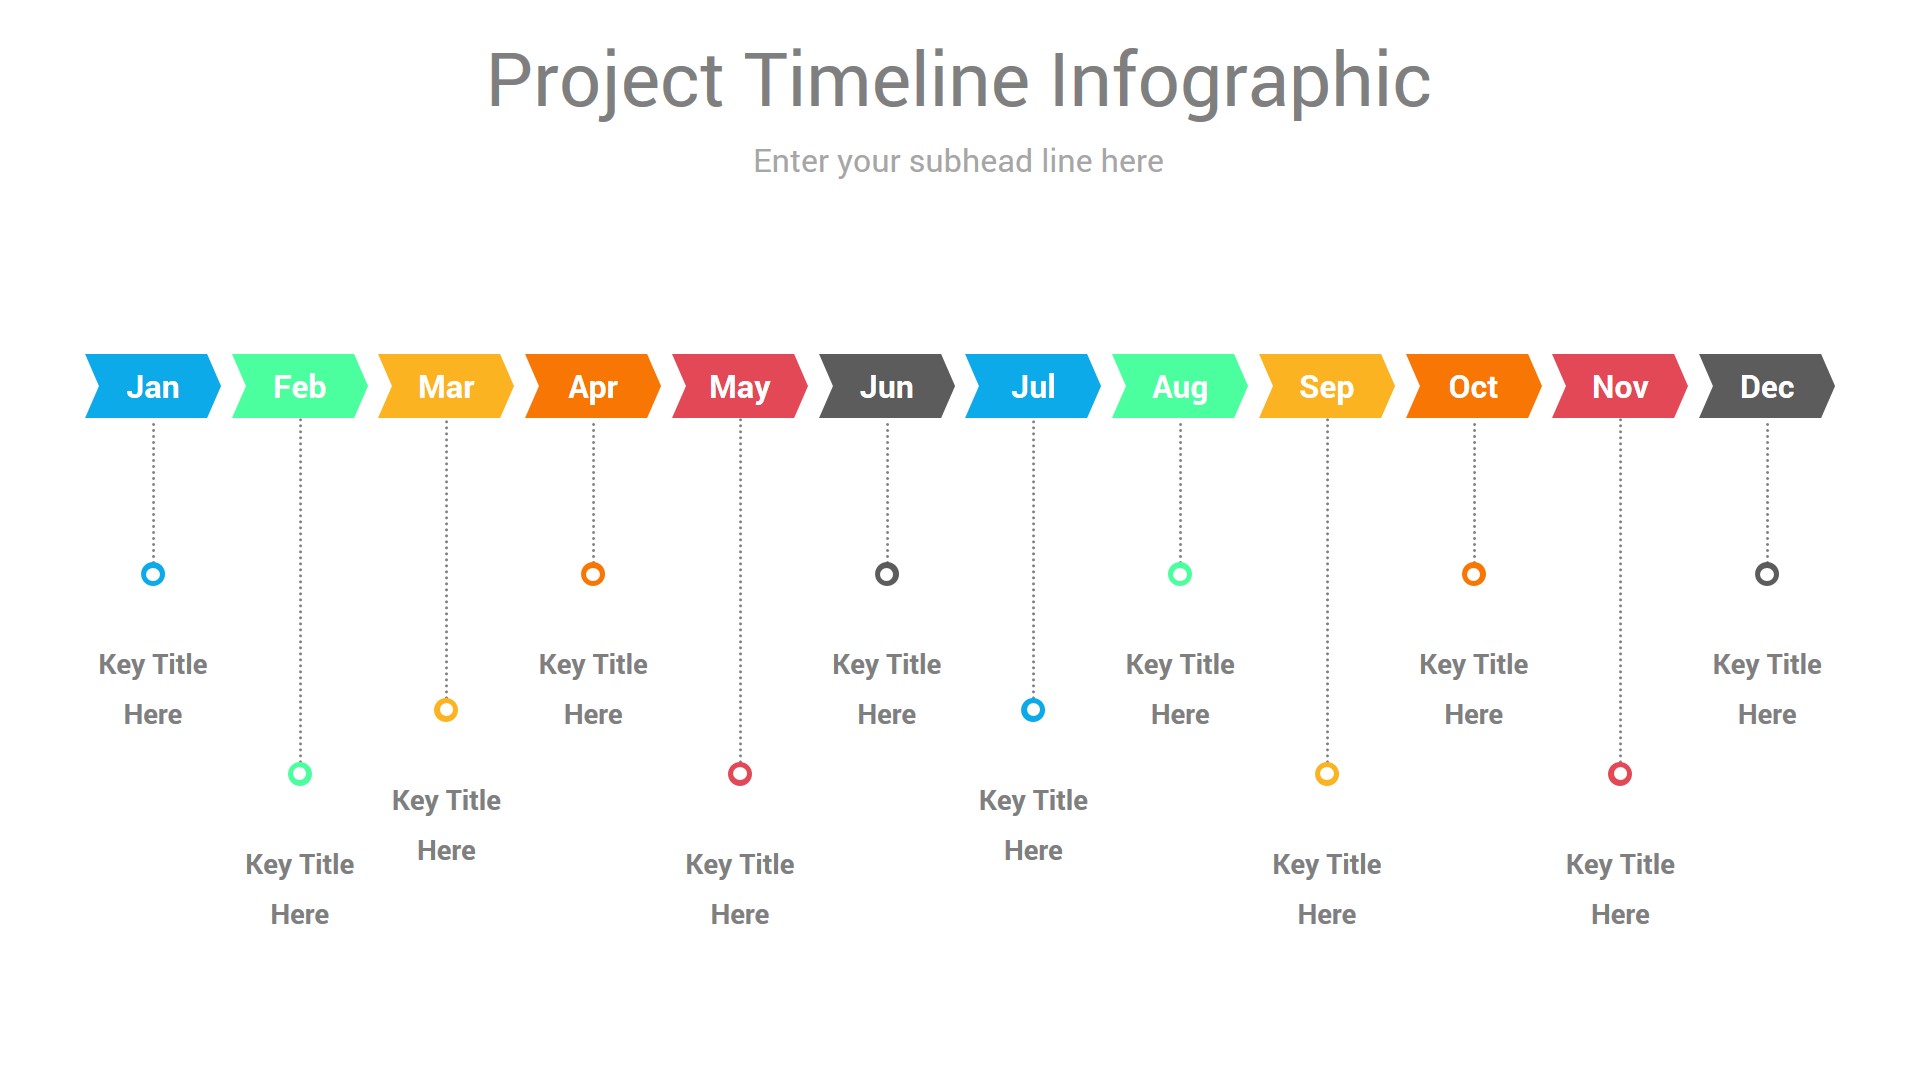 Change Management Timeline PowerPoint Template  CiloArt For Change Template In Powerpoint